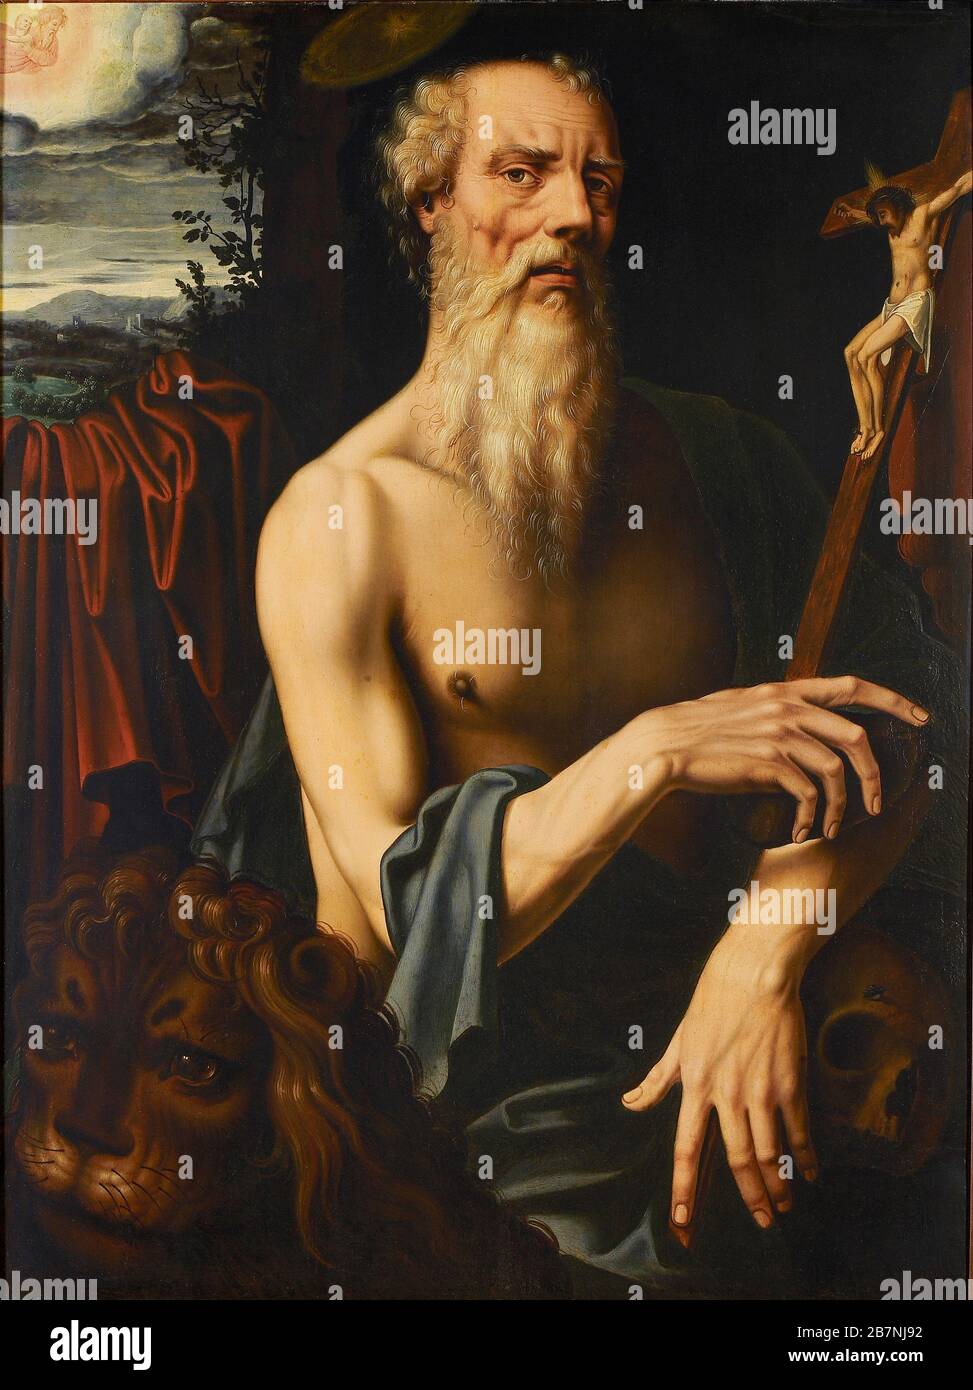 Saint Jerome, First Half of 16th cen.. Found in the Collection of Museum Mayer van den Bergh, Antwerp. Stock Photo